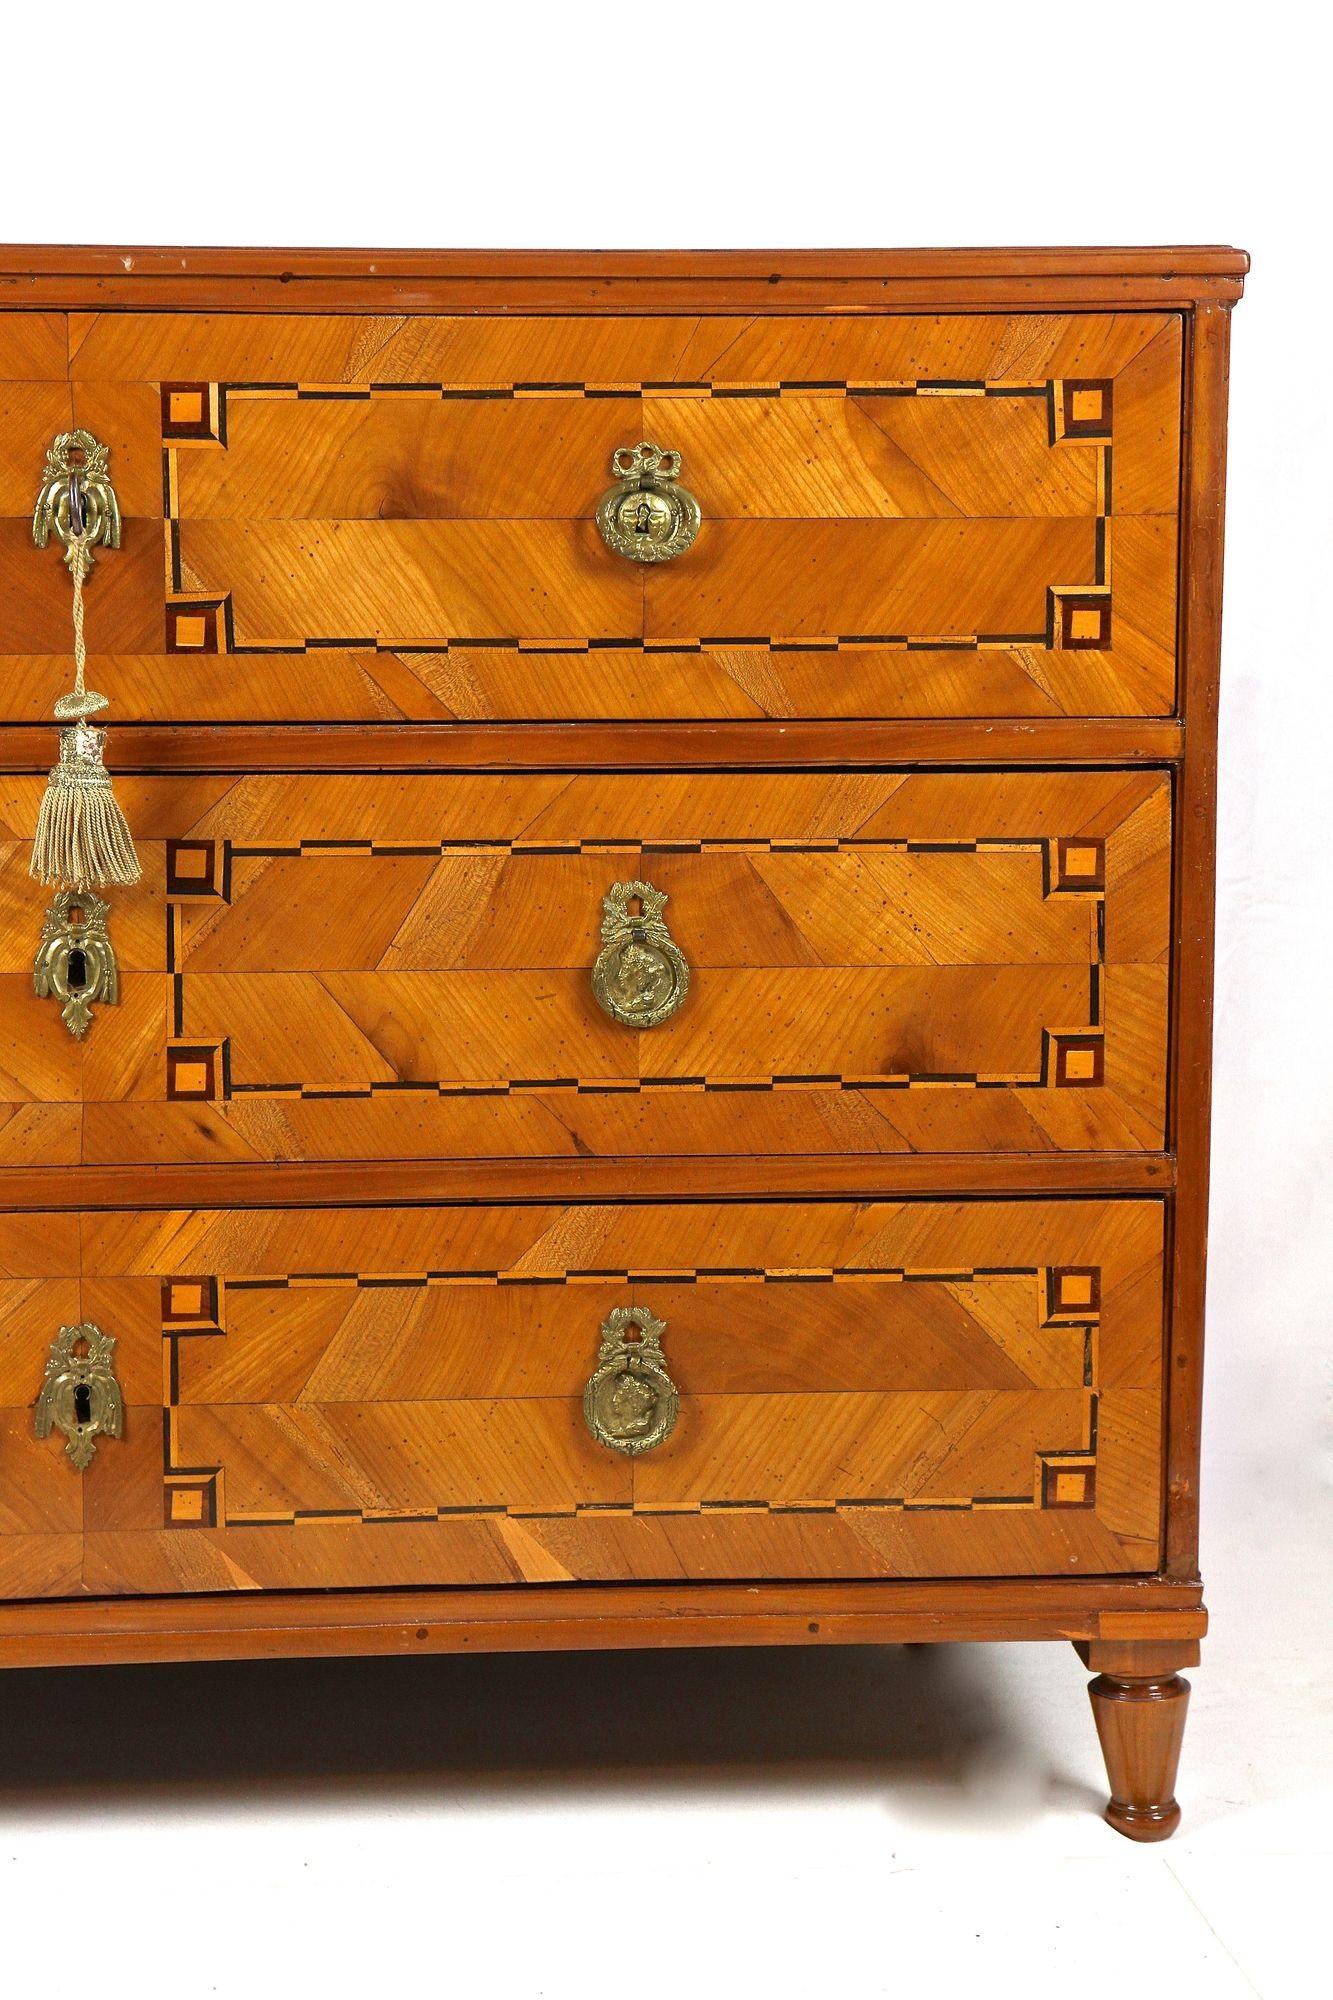 Polished 18th Century Cherrywood Chest of Drawers, Josephinism Period, Austria circa 1790 For Sale